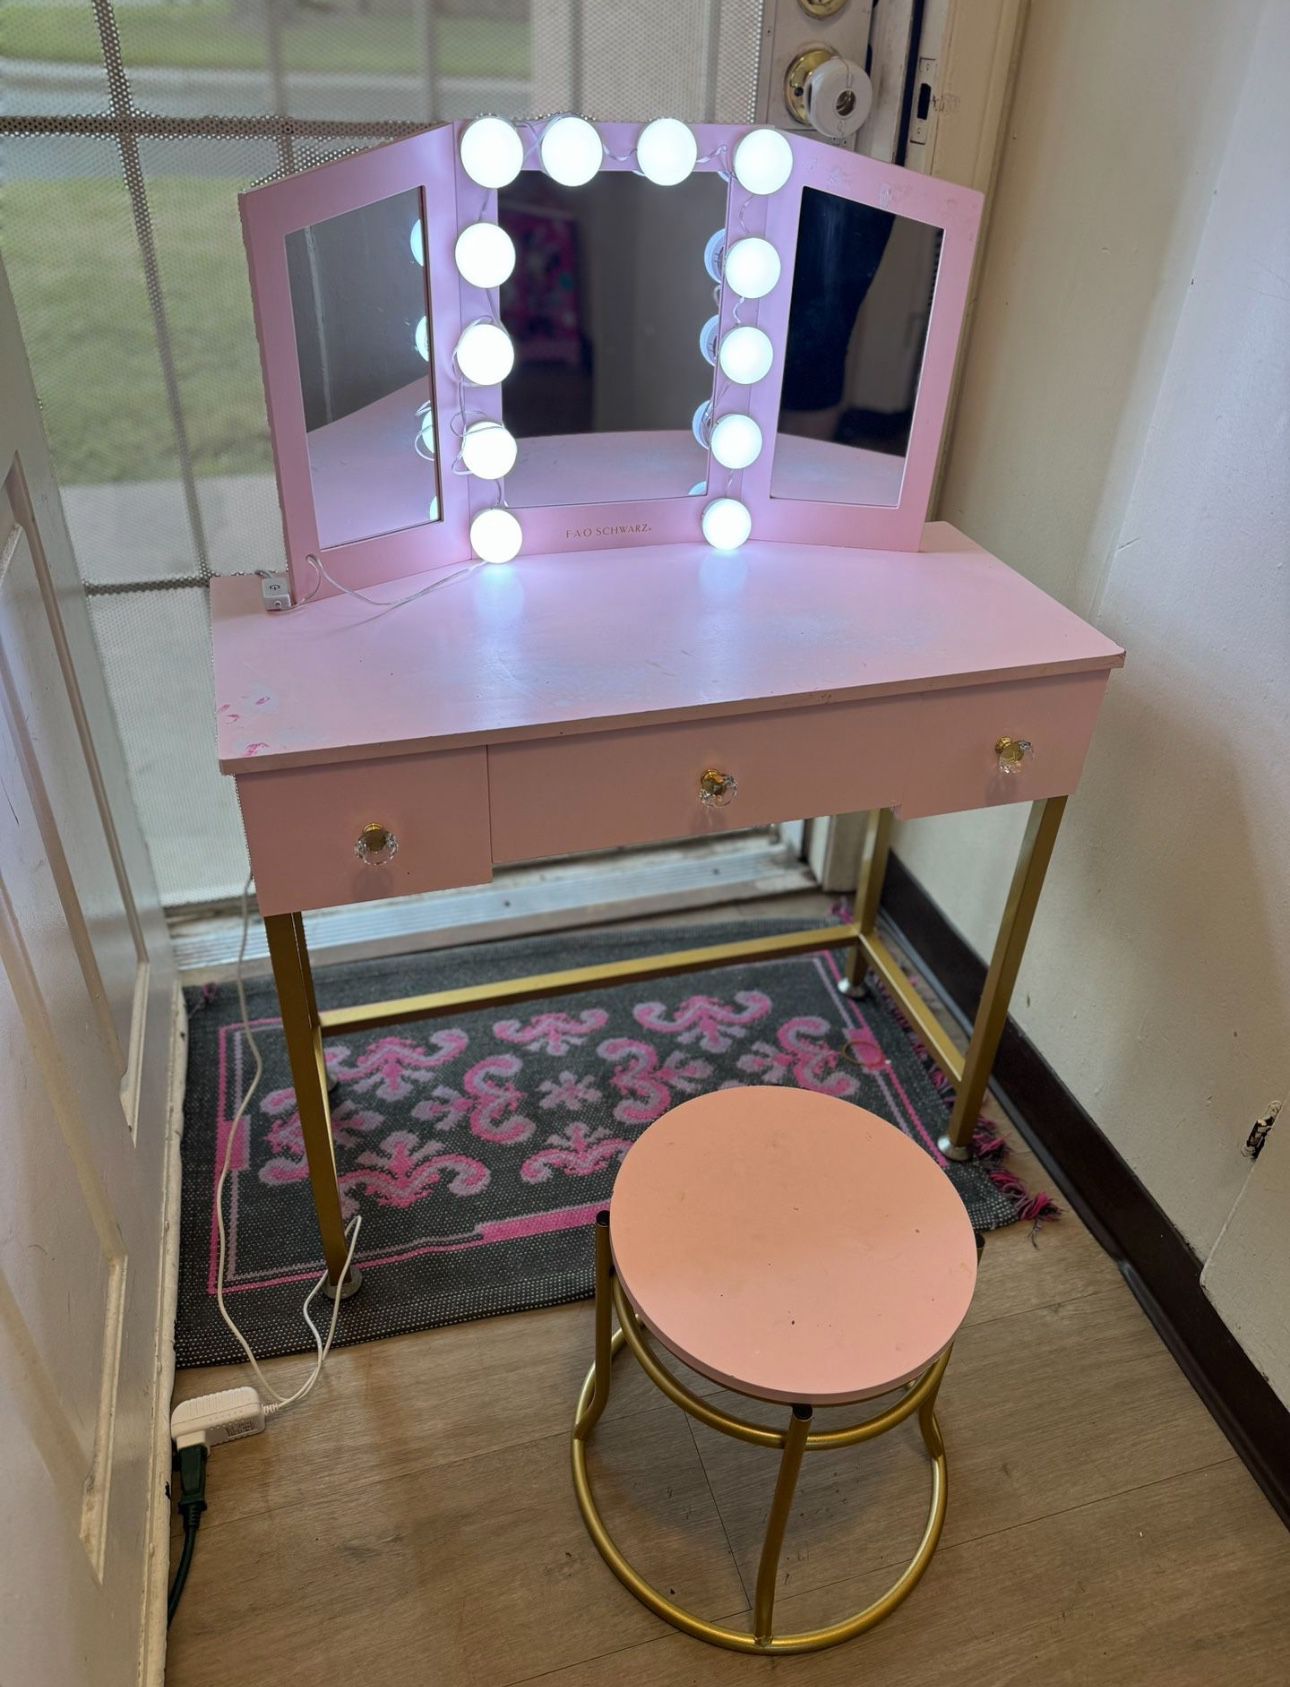 Vanity with Lights, Makeup Vanity with Mirror, 3 Lighting Modes, for Bedroom, Light Pink / Small / For 5 Years & Up / 3 Storage Cabinets Very Spacious